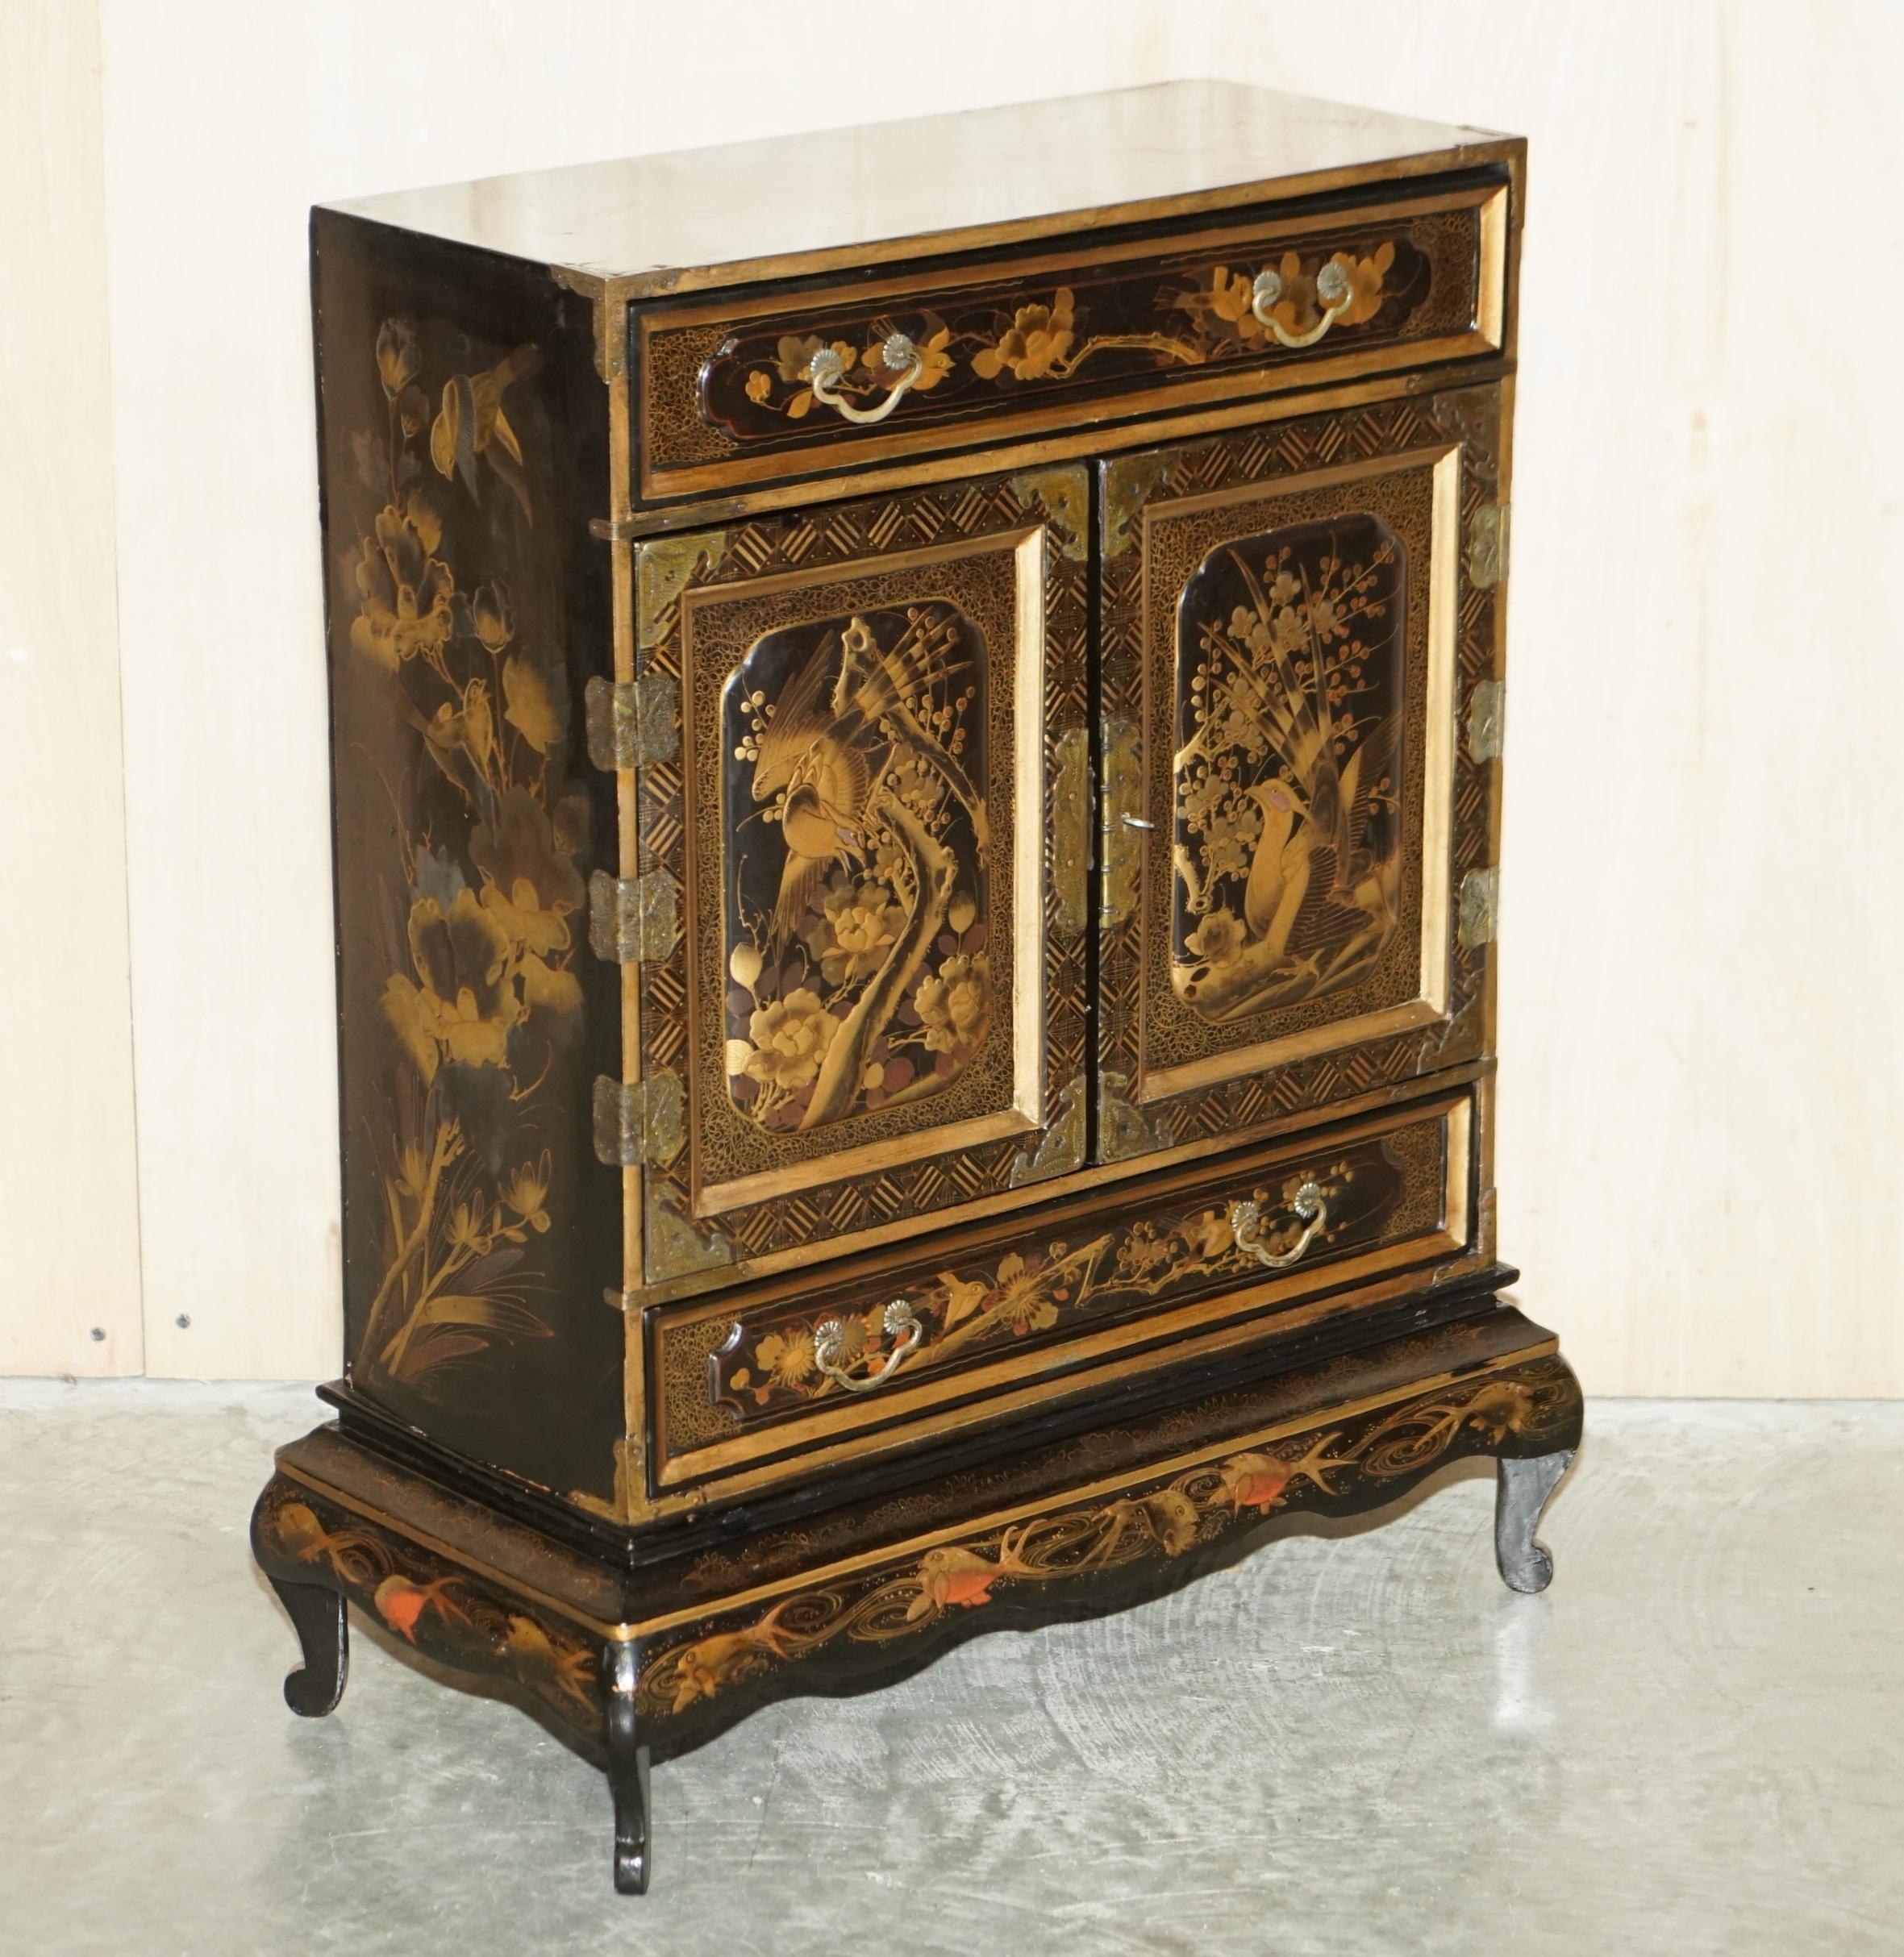 We are delighted to offer for sale this lovely vintage circa 1900's hand painted and lacquered Chinese collectors tea cabinet with lots of drawers

A very good looking and well made piece, these are now highly collectable as art furniture. This